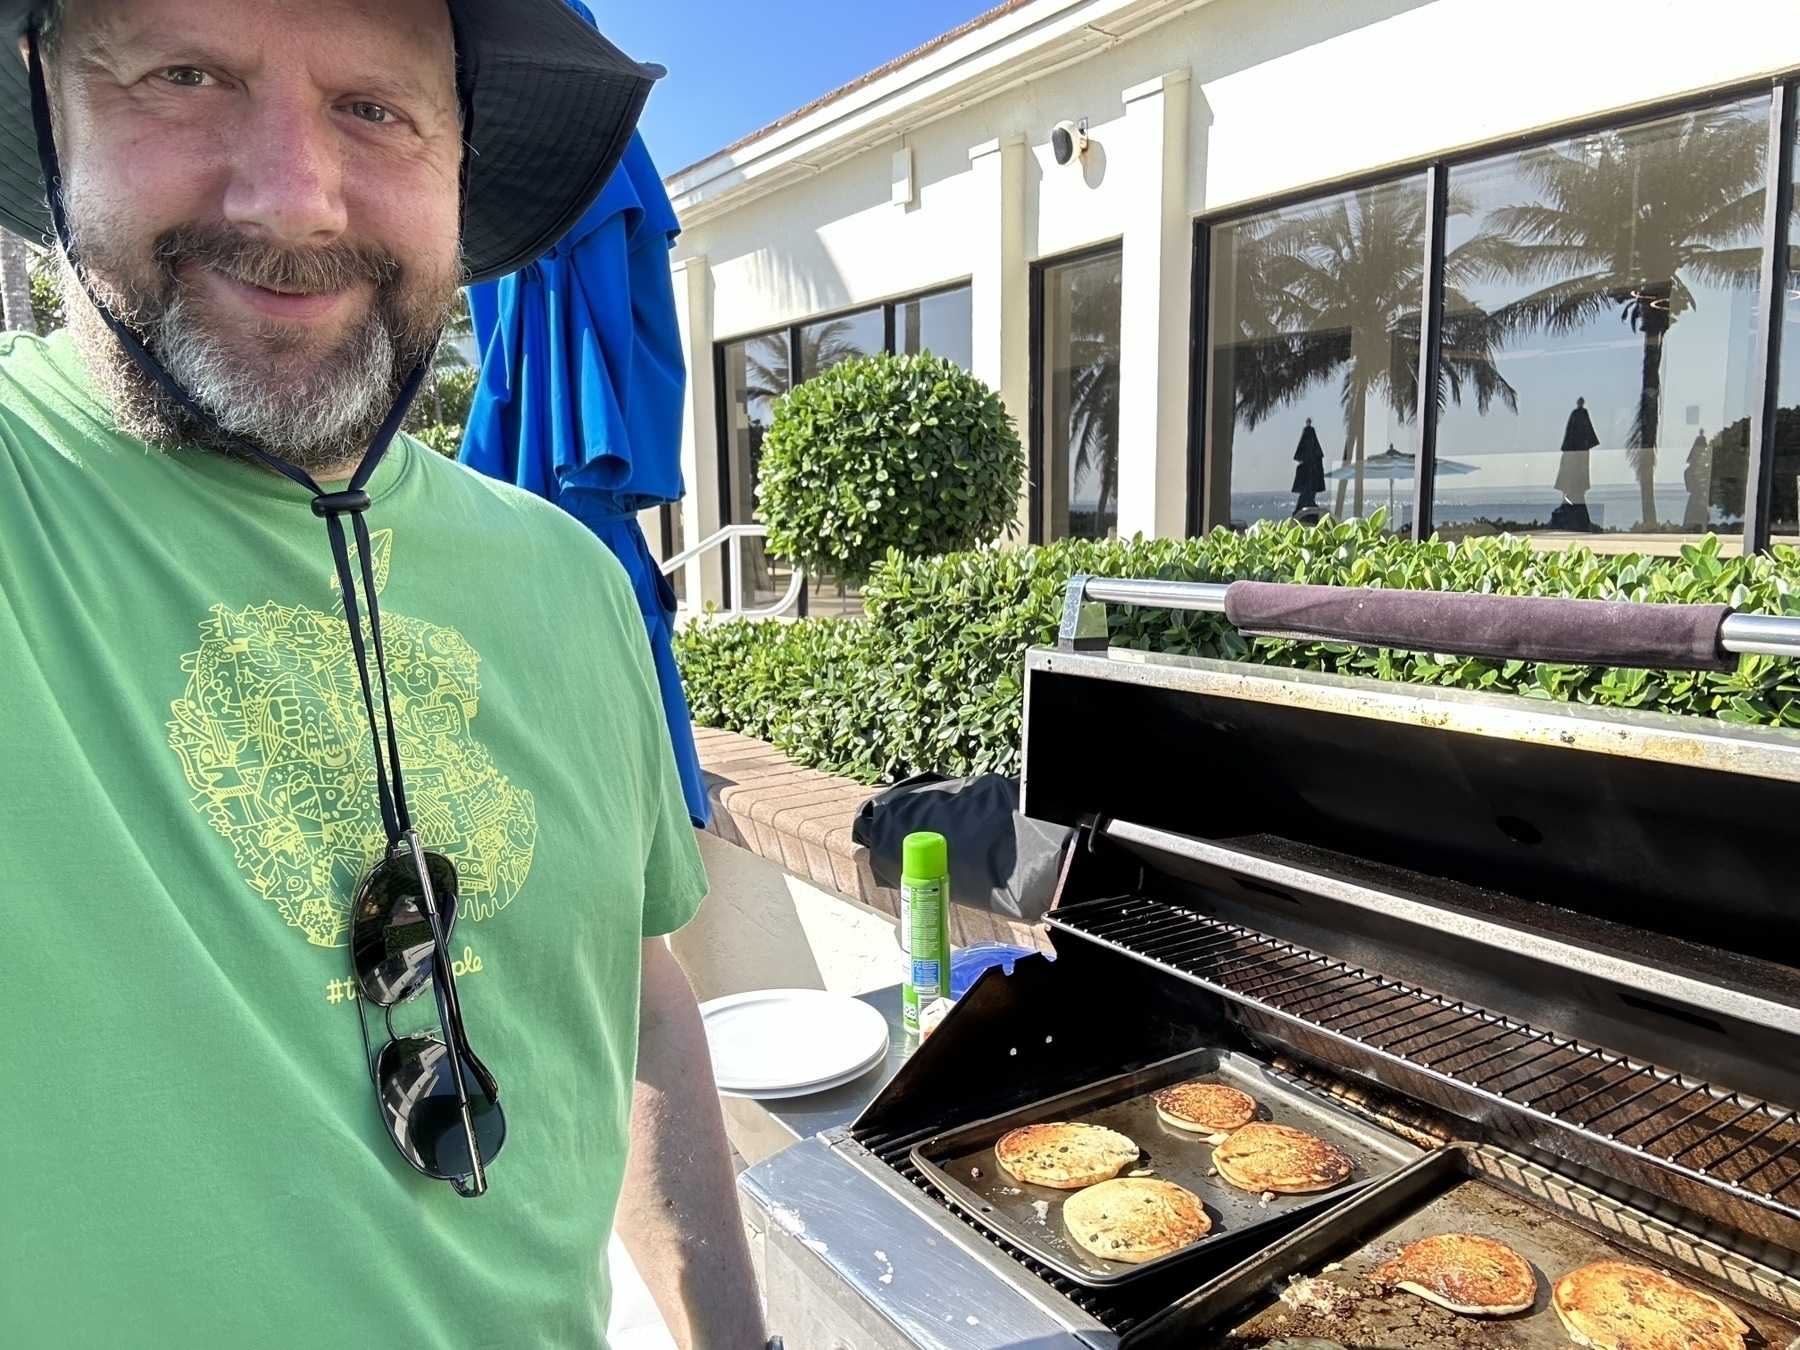 Me at a grill cooking pancakes. palm trees and the ocean reflected in clubhouse windows.